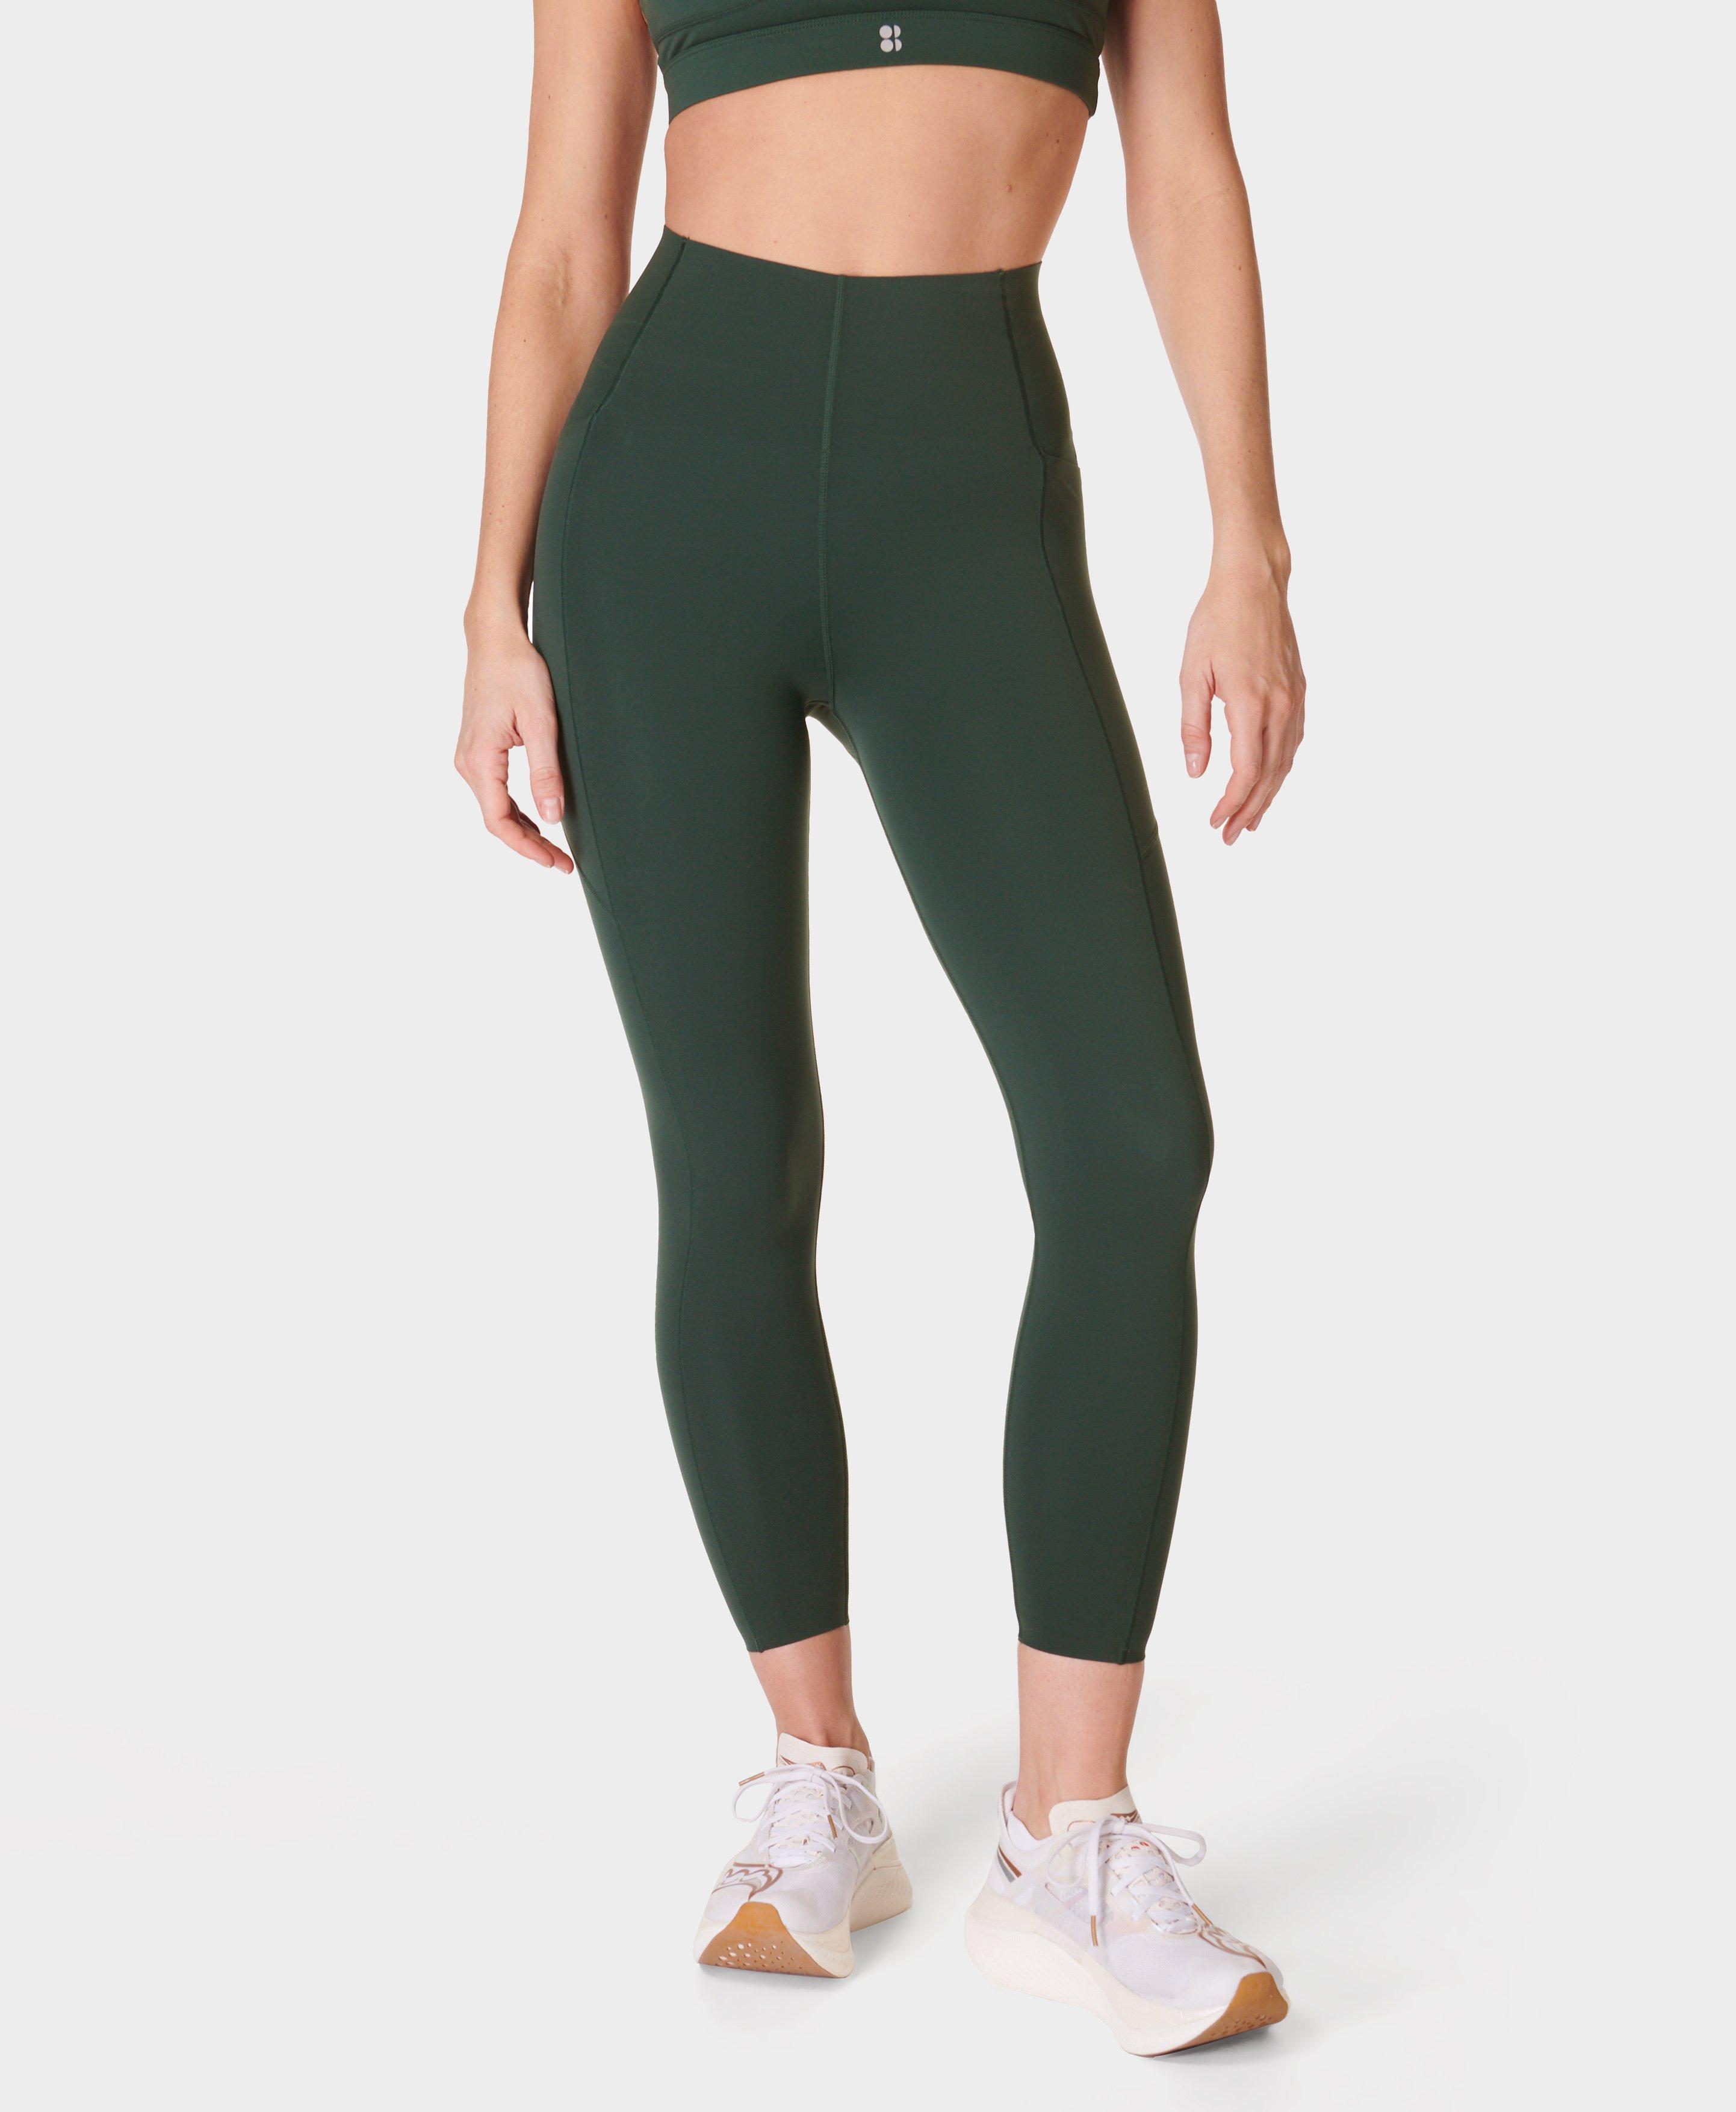 Sweaty Betty High Waisted Power Leggings Retro Green Size Small, Women's  Fashion, Activewear on Carousell